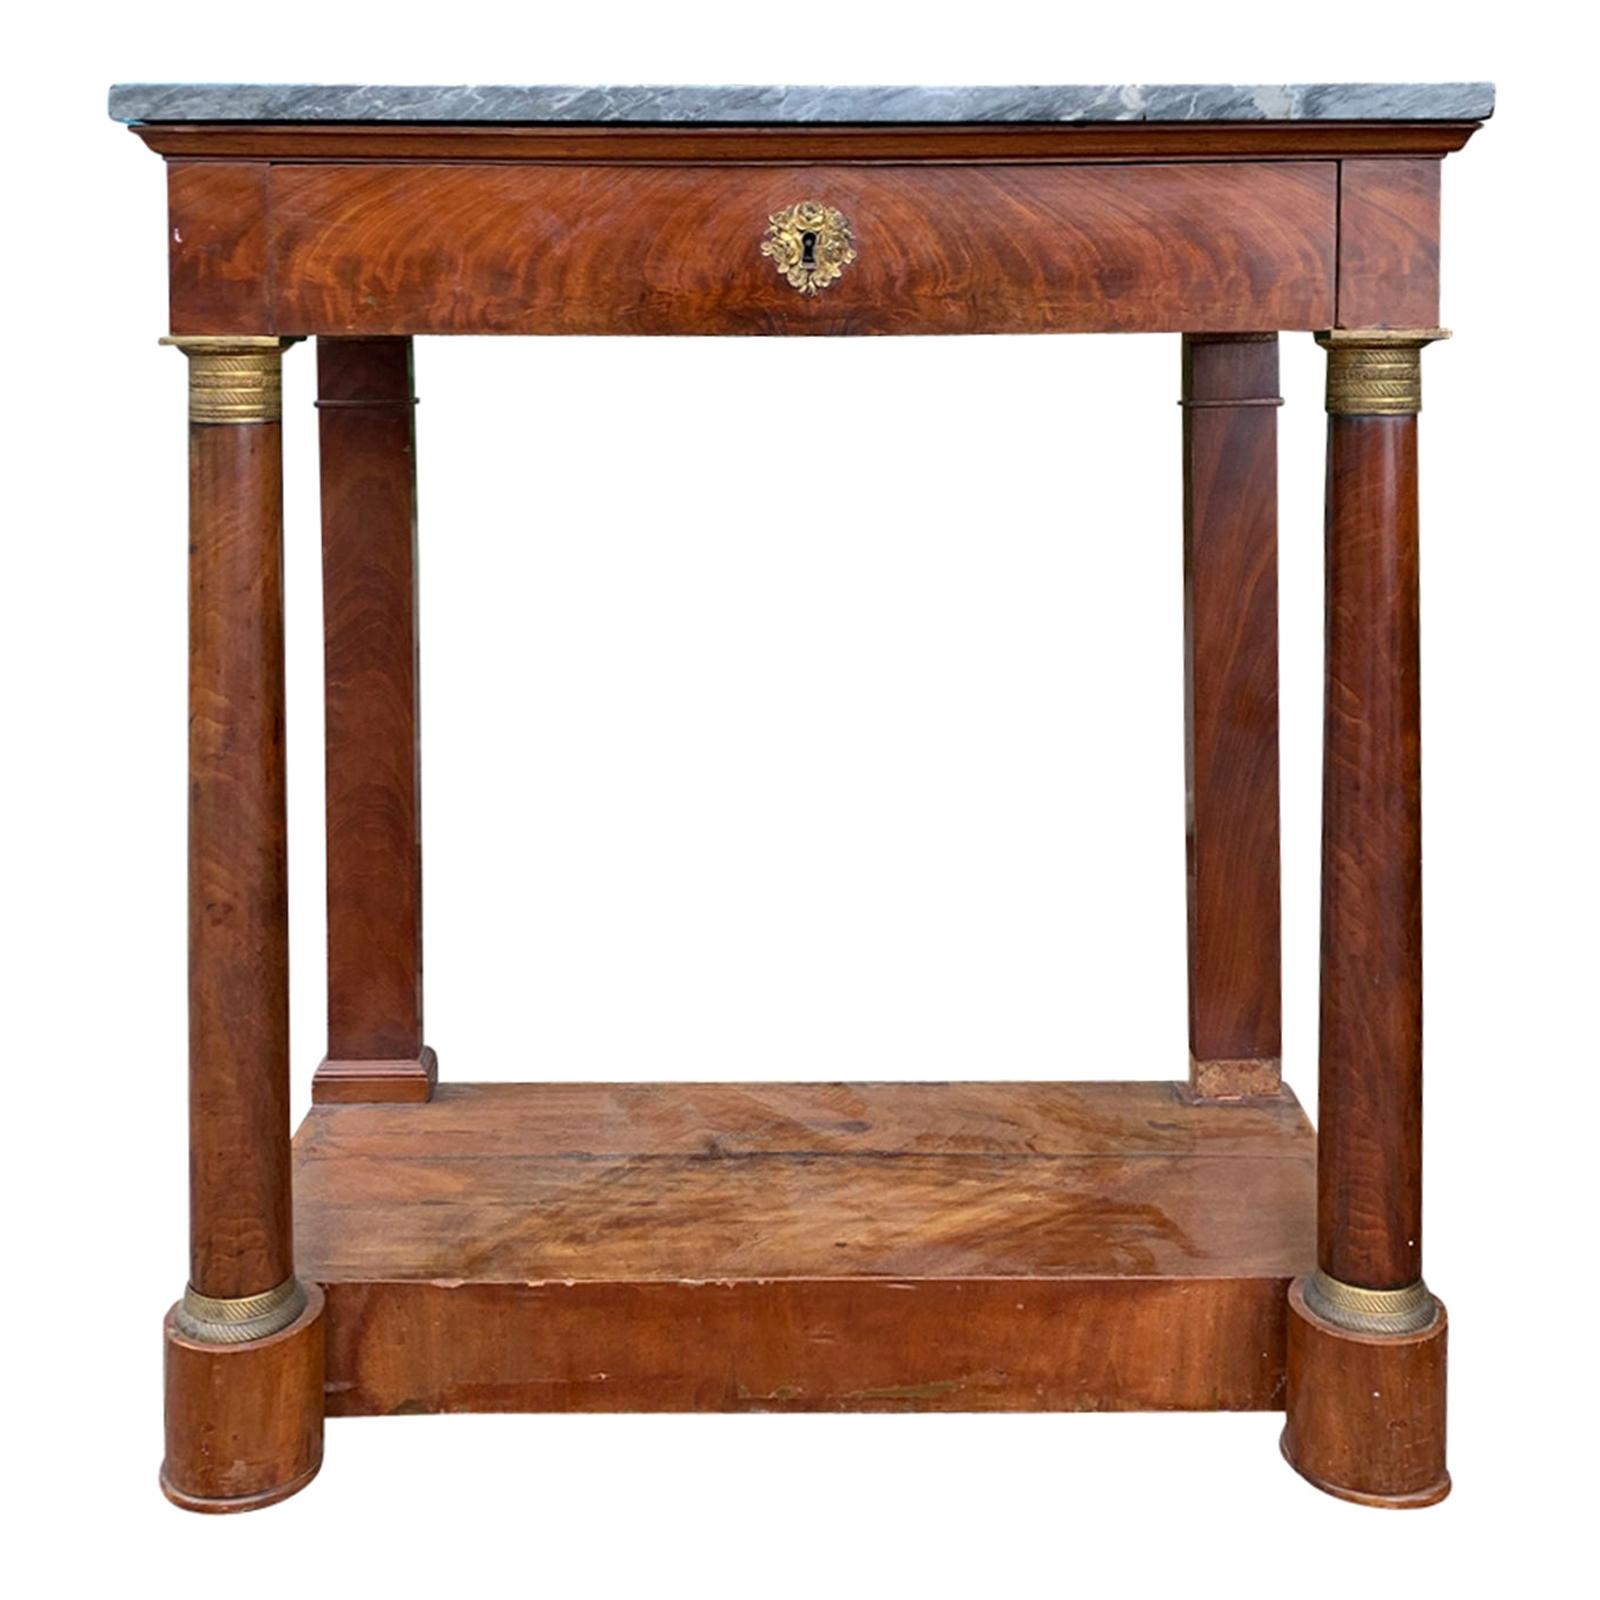 19th Century Mahogany Bronze Mounted Console with Grey Marble-Top, One-Drawer